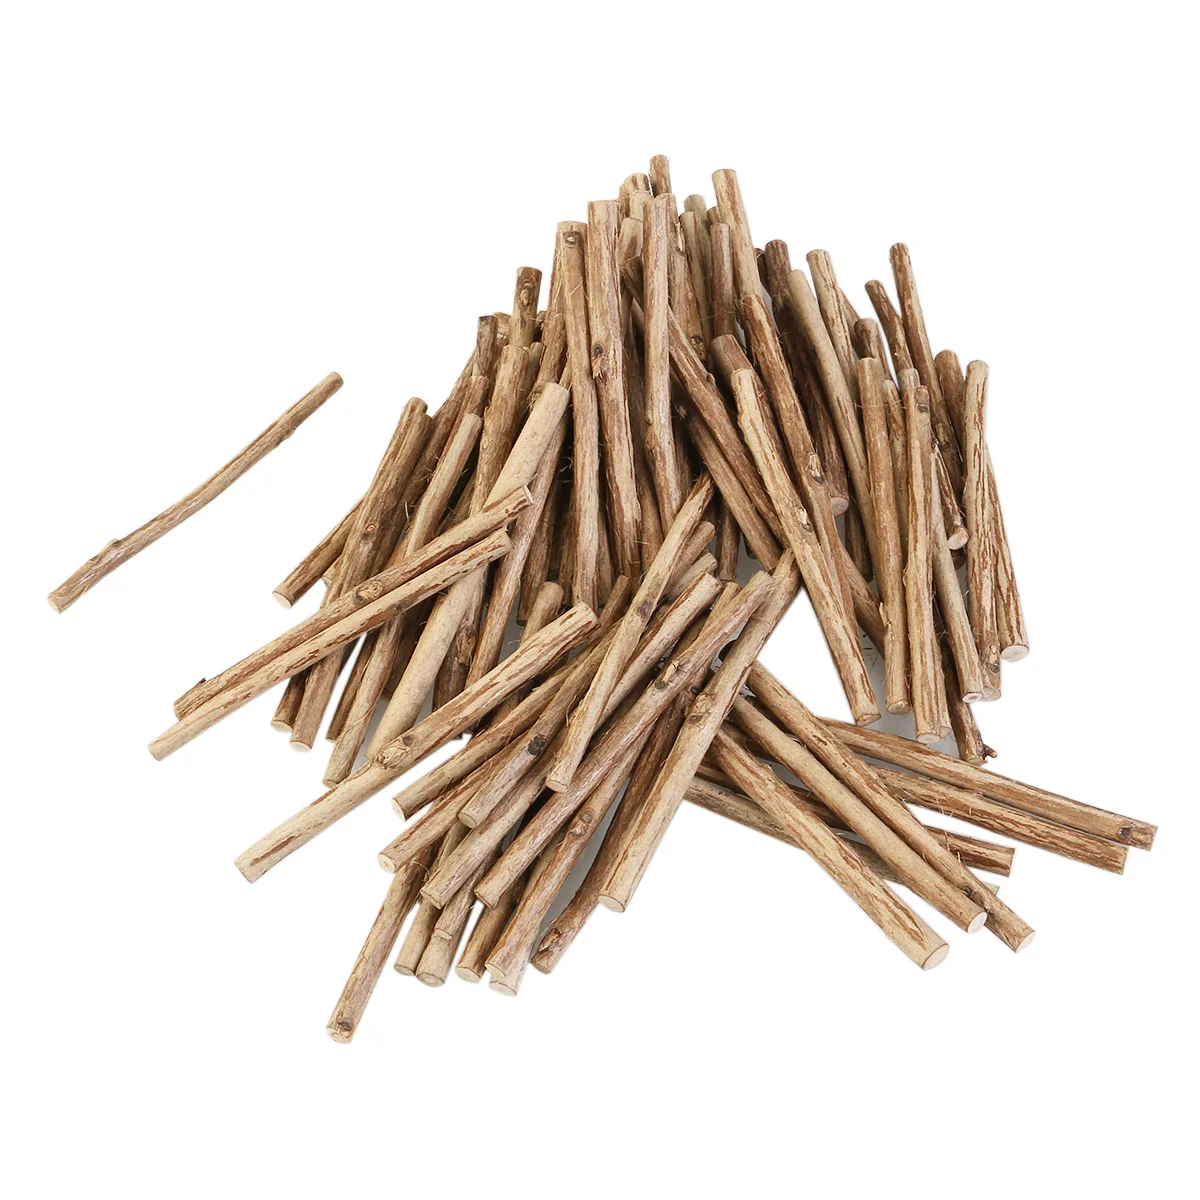 

100pcs Wood Sticks Wood Log Painting Tea Tree DIY Crafts Photo Props Clubs Accessory for DIY Crafts